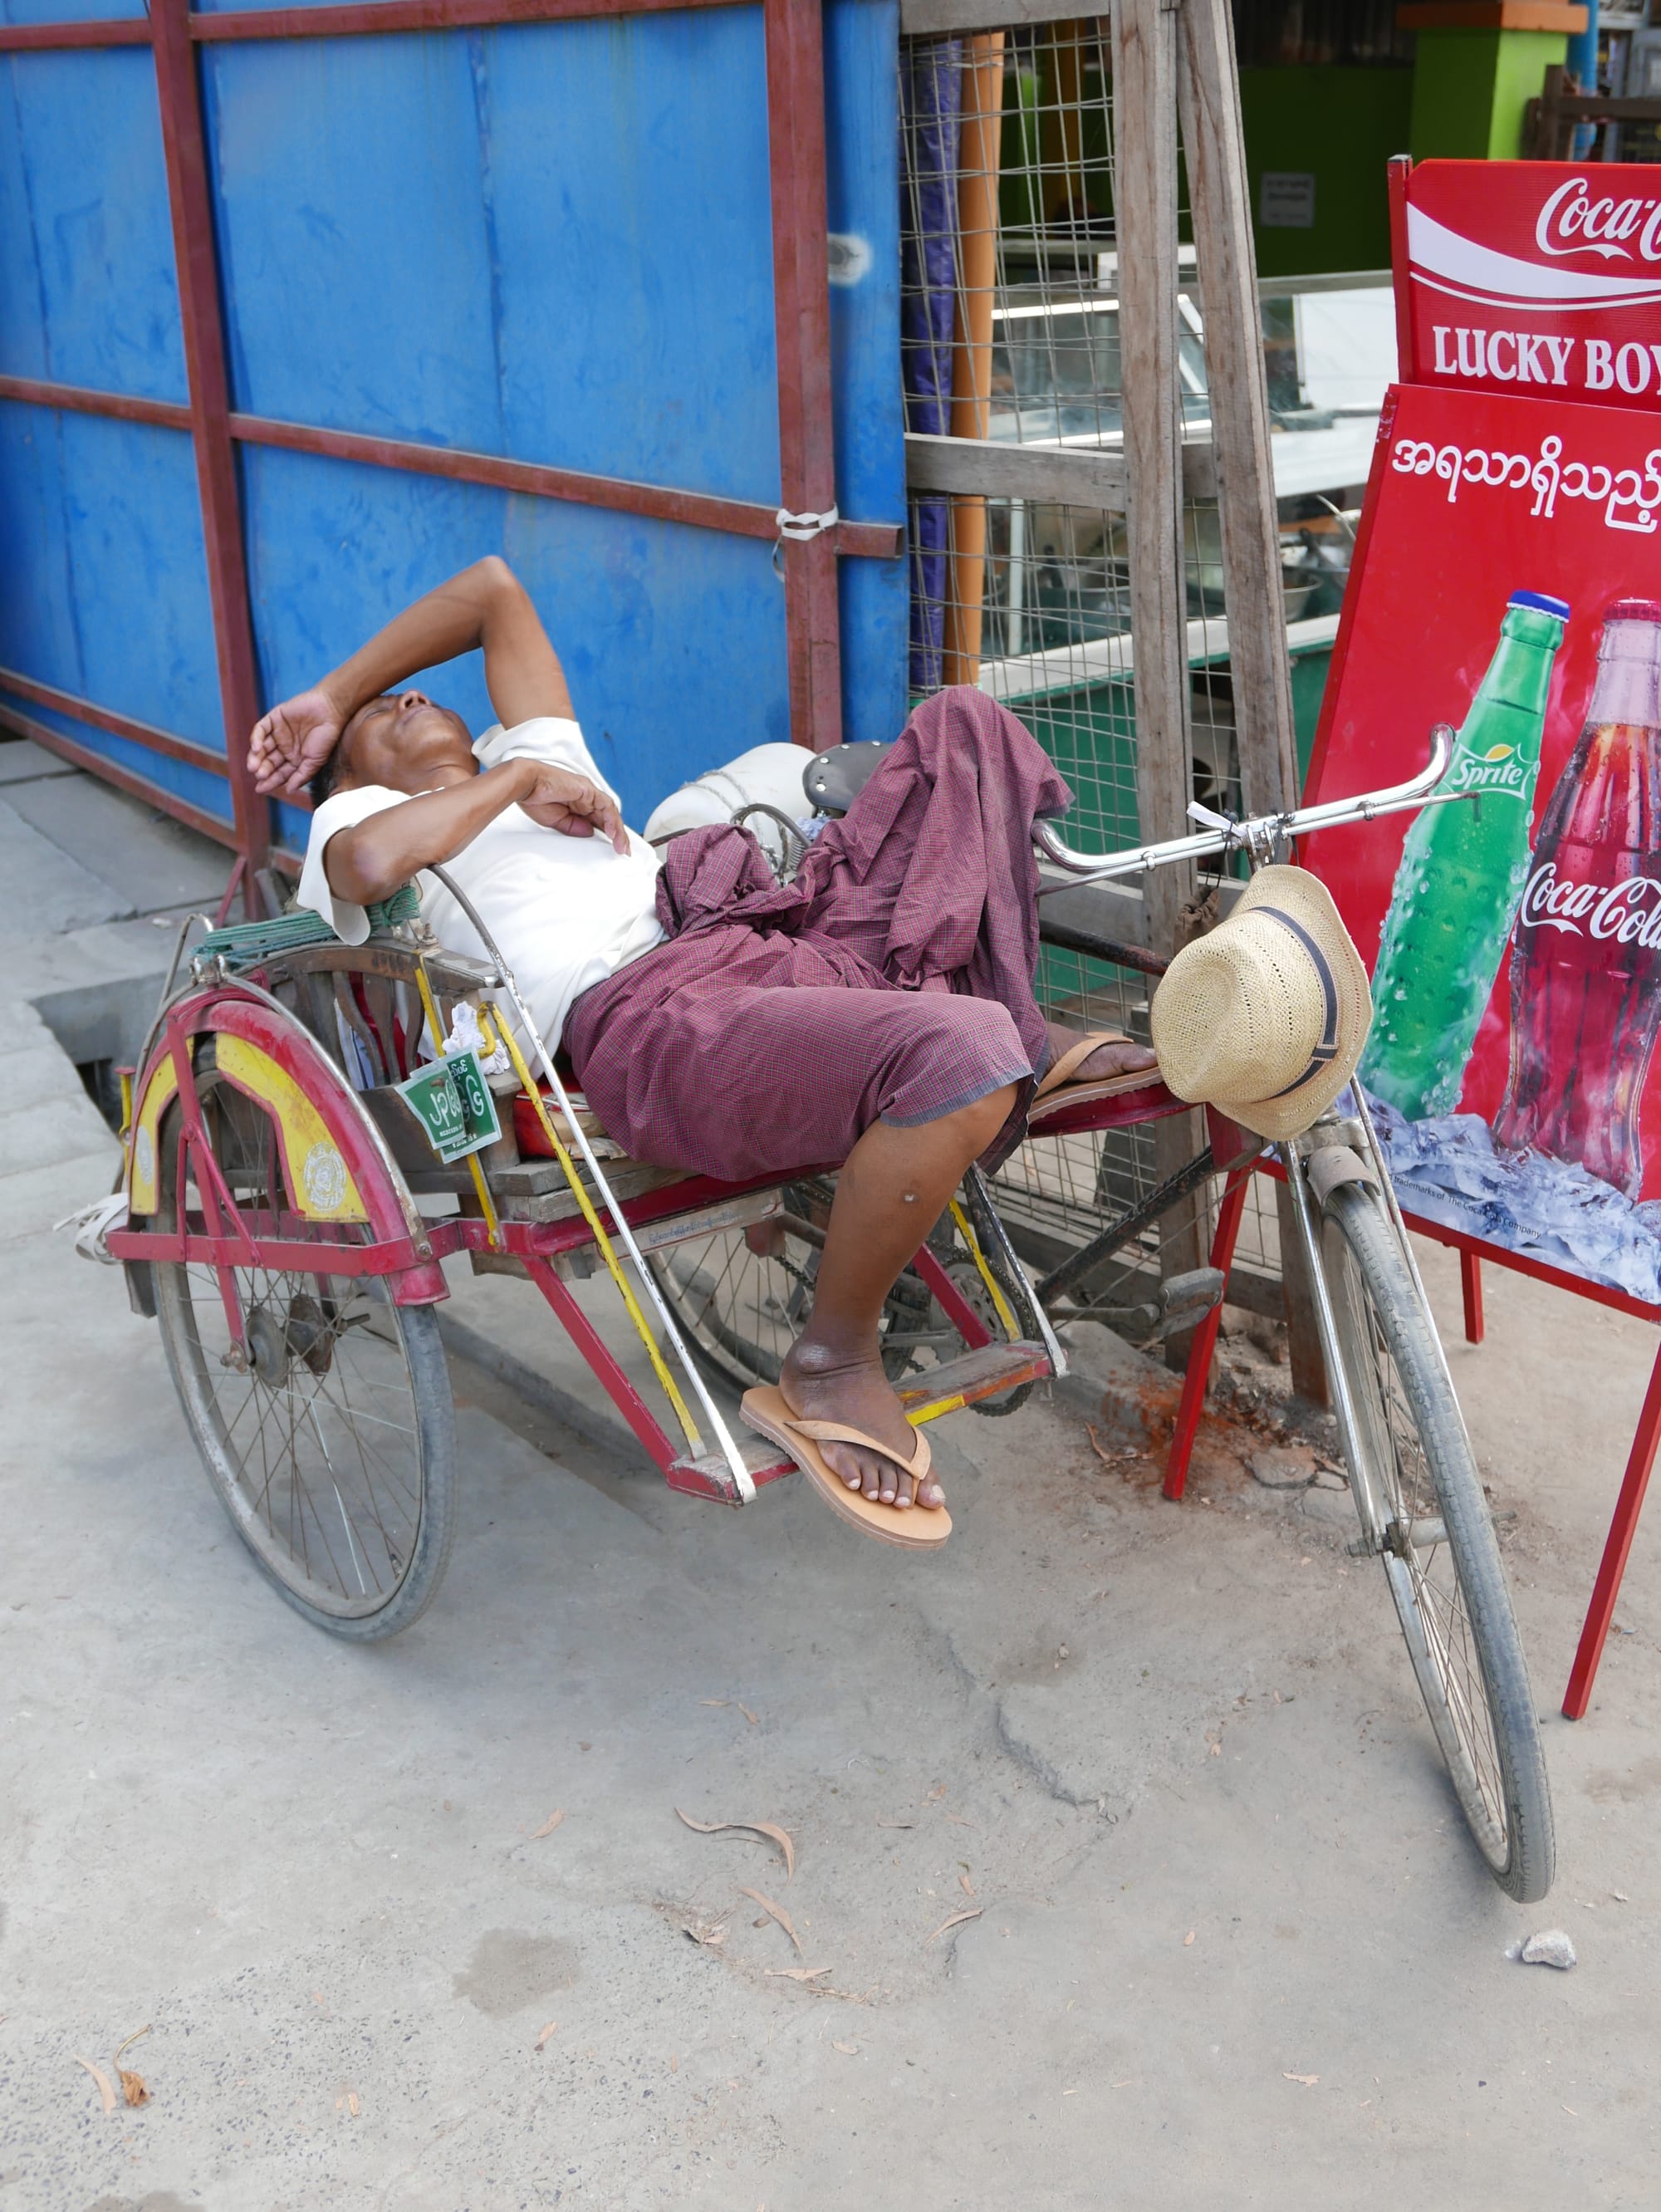 Photo by Author — being a bike taxi is hard work — time for a nap